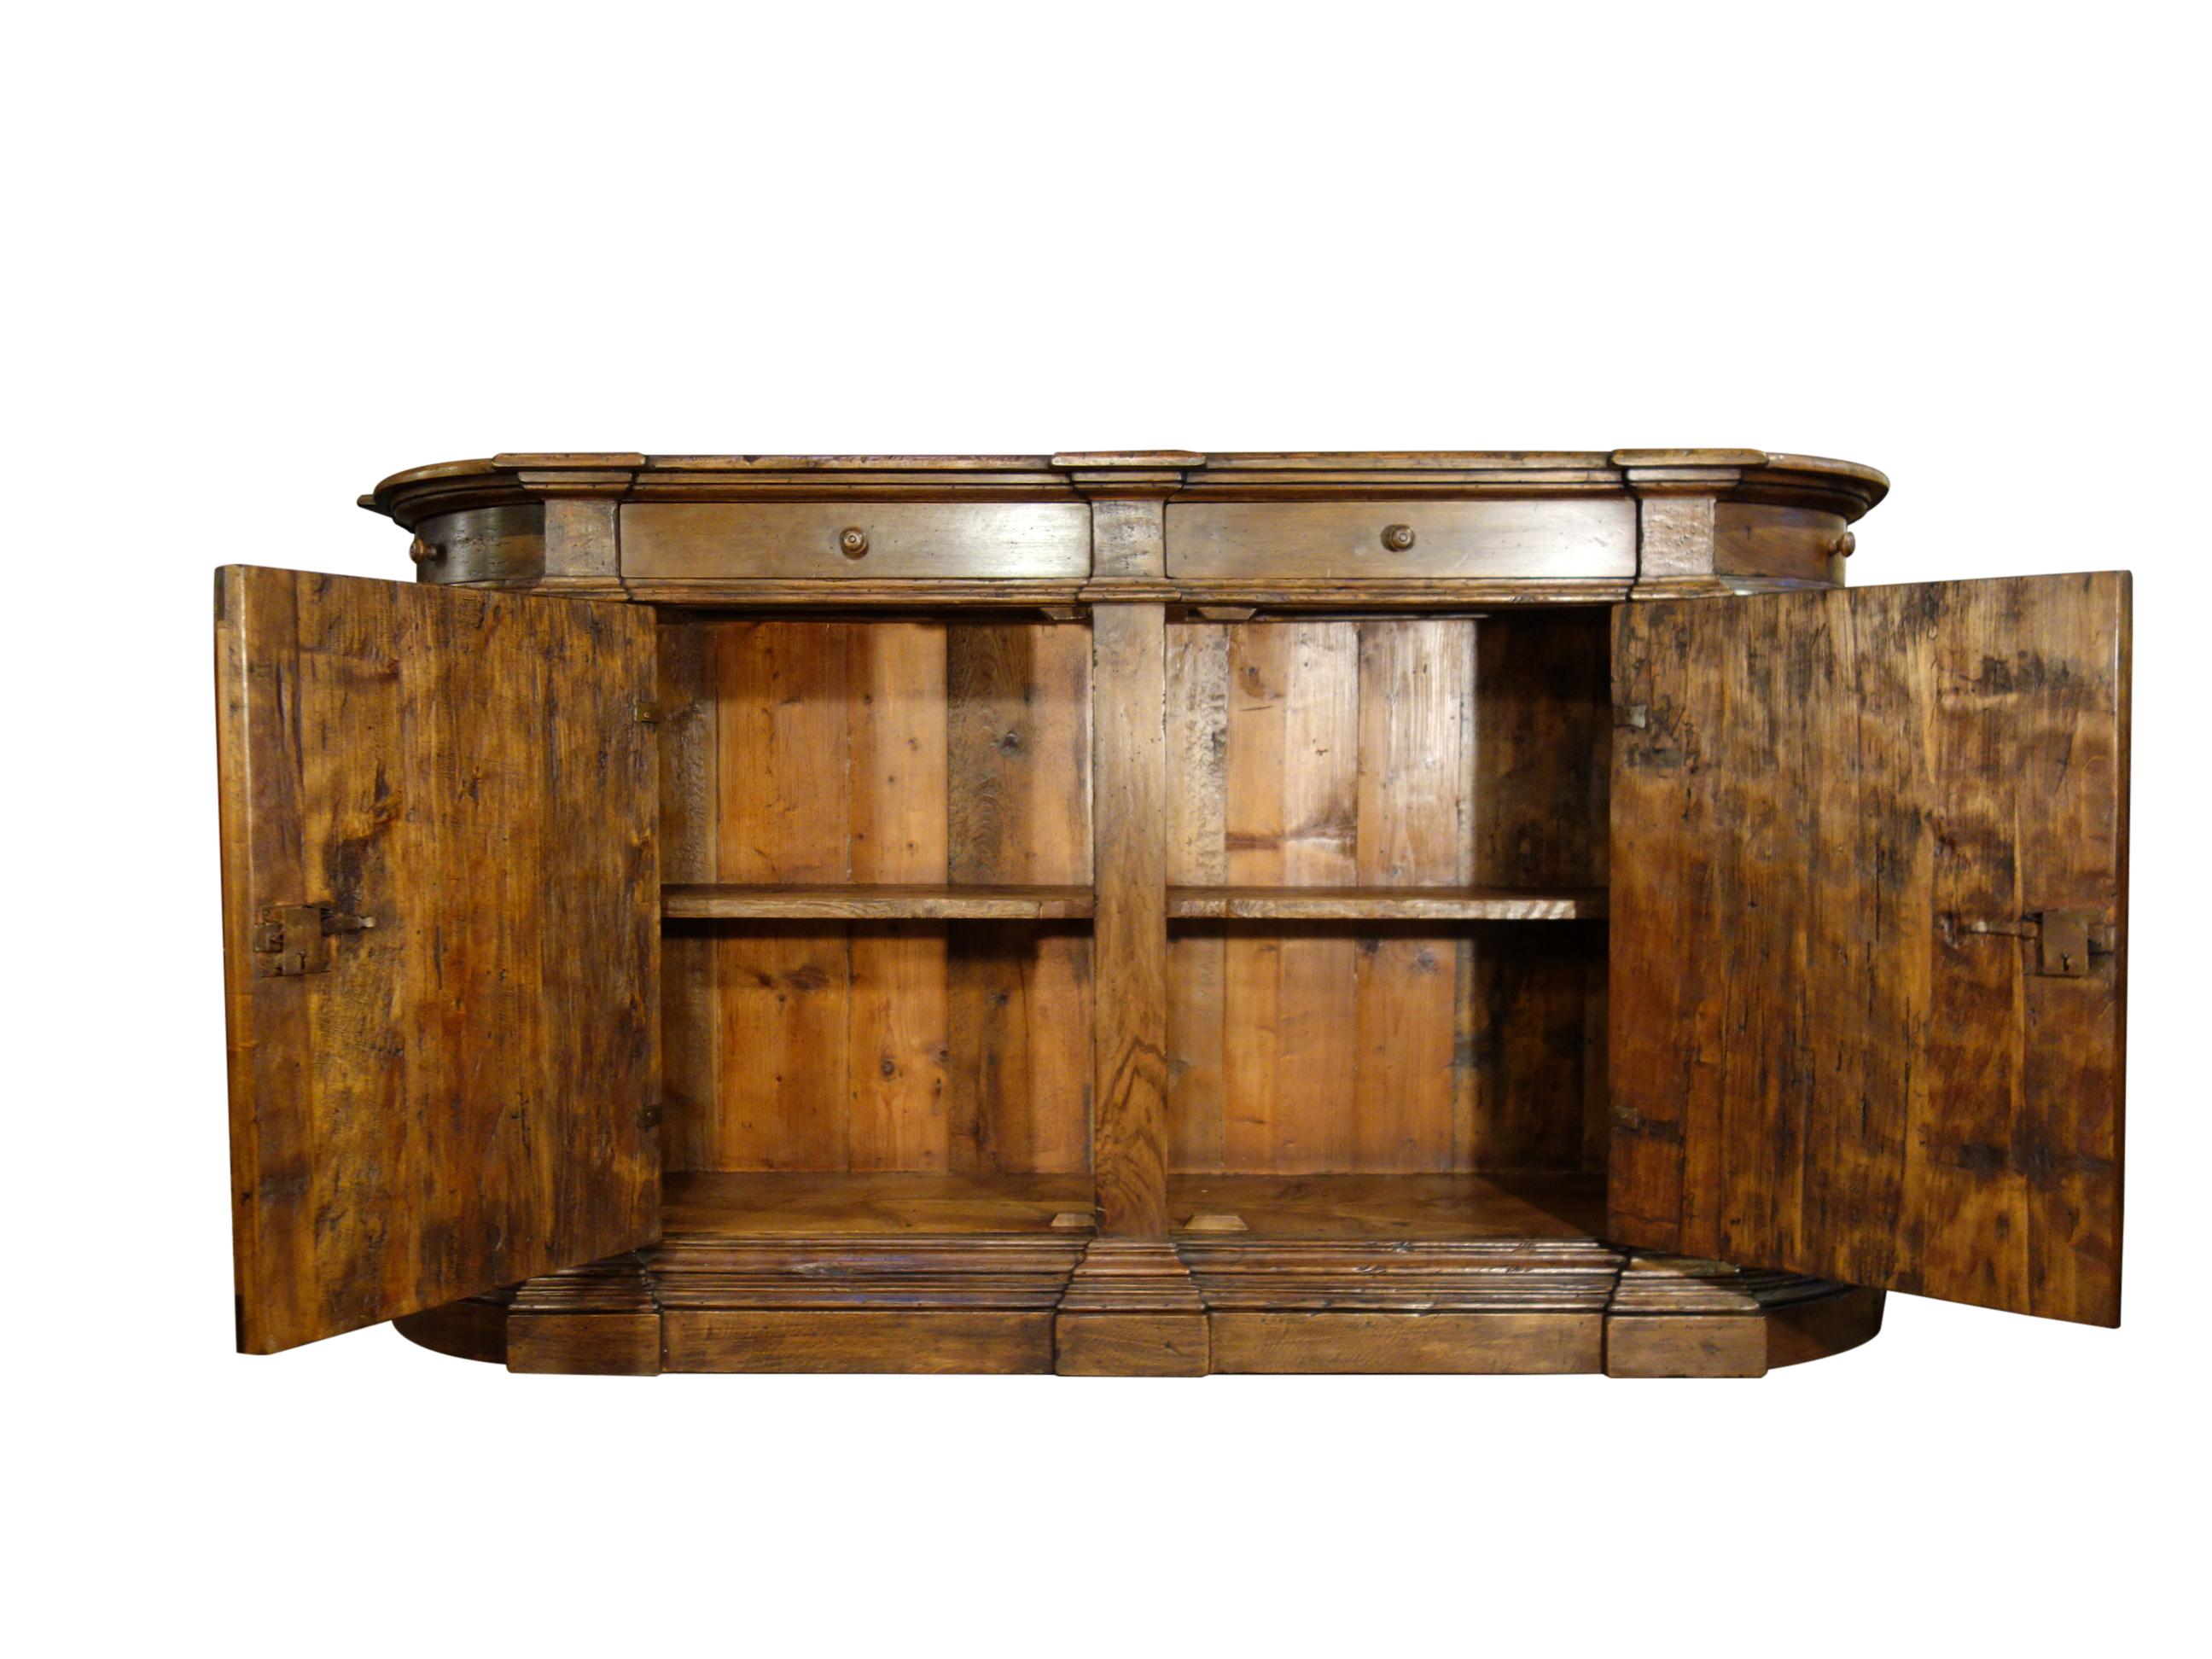 Italian Old Walnut Credenza with Olivewood Burl:  18th Century Style

Extraordinary Italian handcraft as exhibited in this finely mastered Italian four-door and four-drawer credenza sideboard, featuring thick aged Italian solid walnut planks, panels